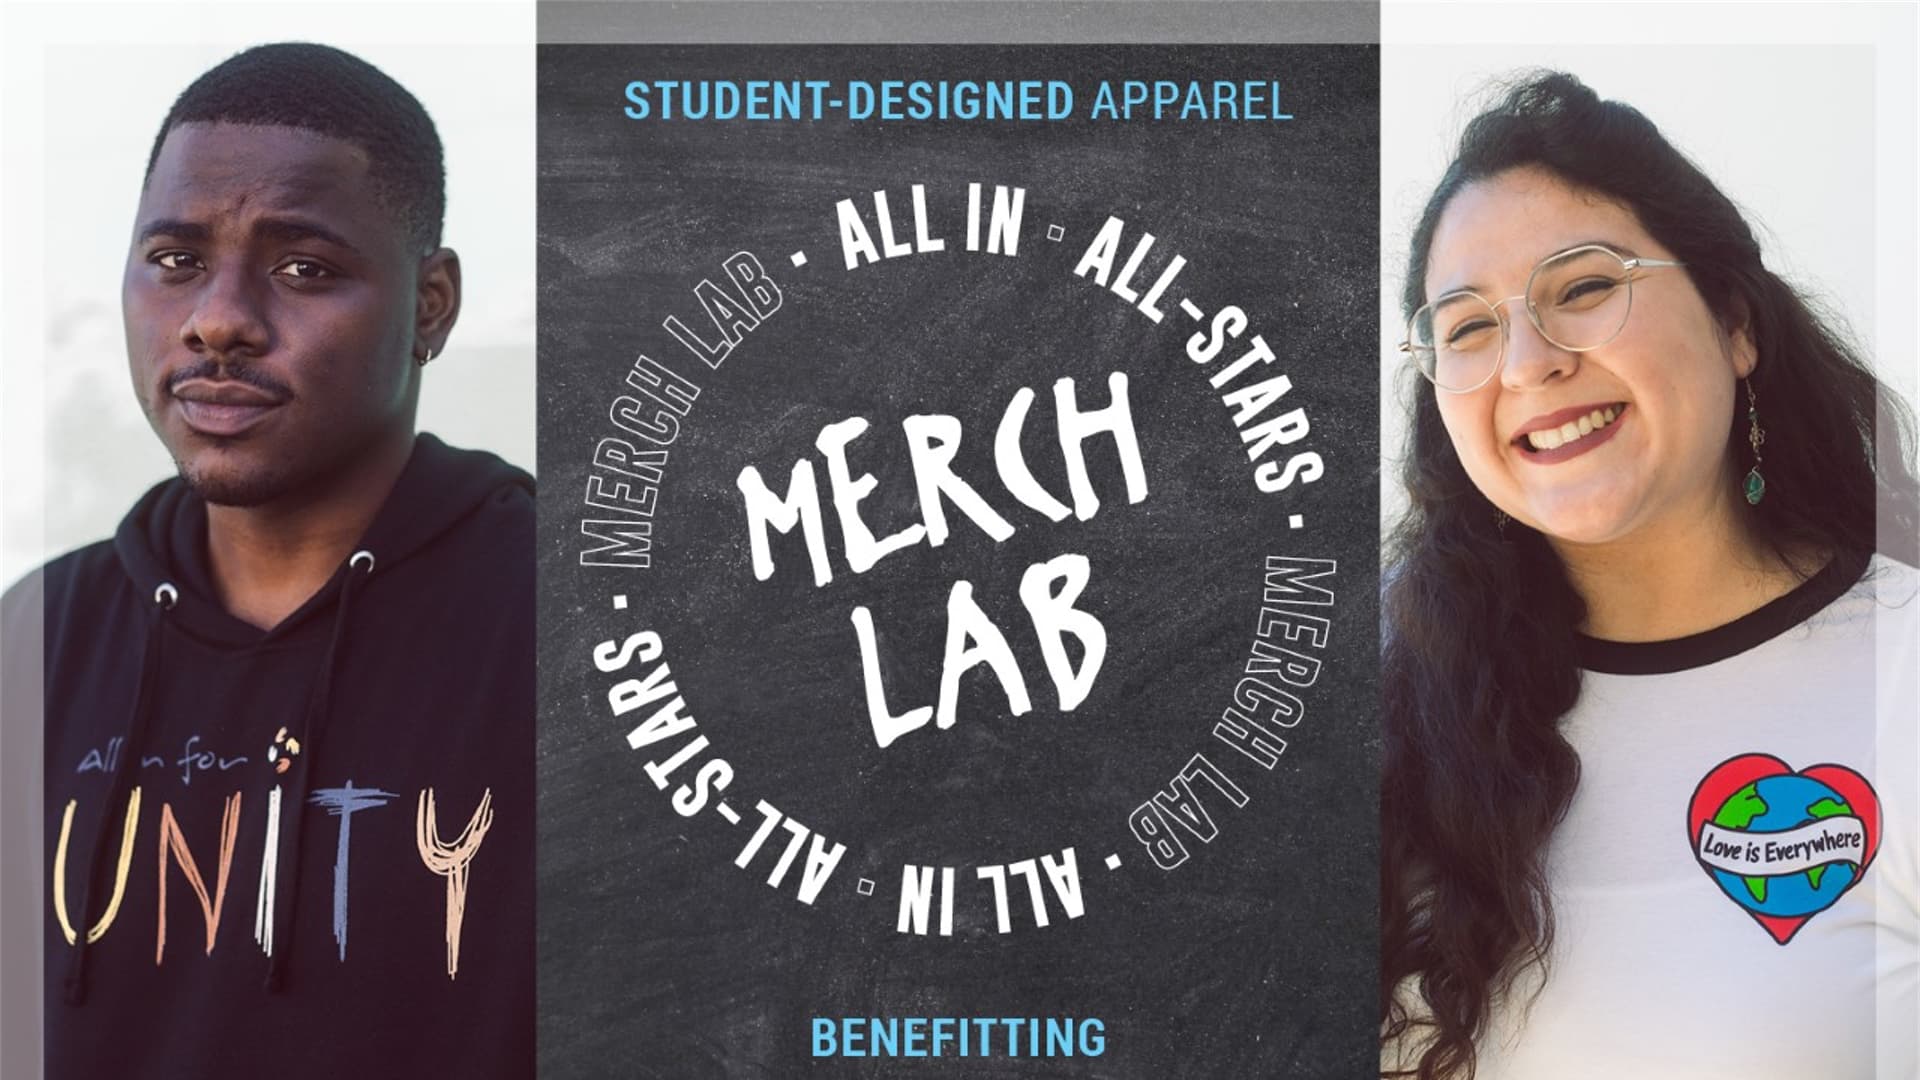 Students wearing merch lab apparel with Merch Lab graphic